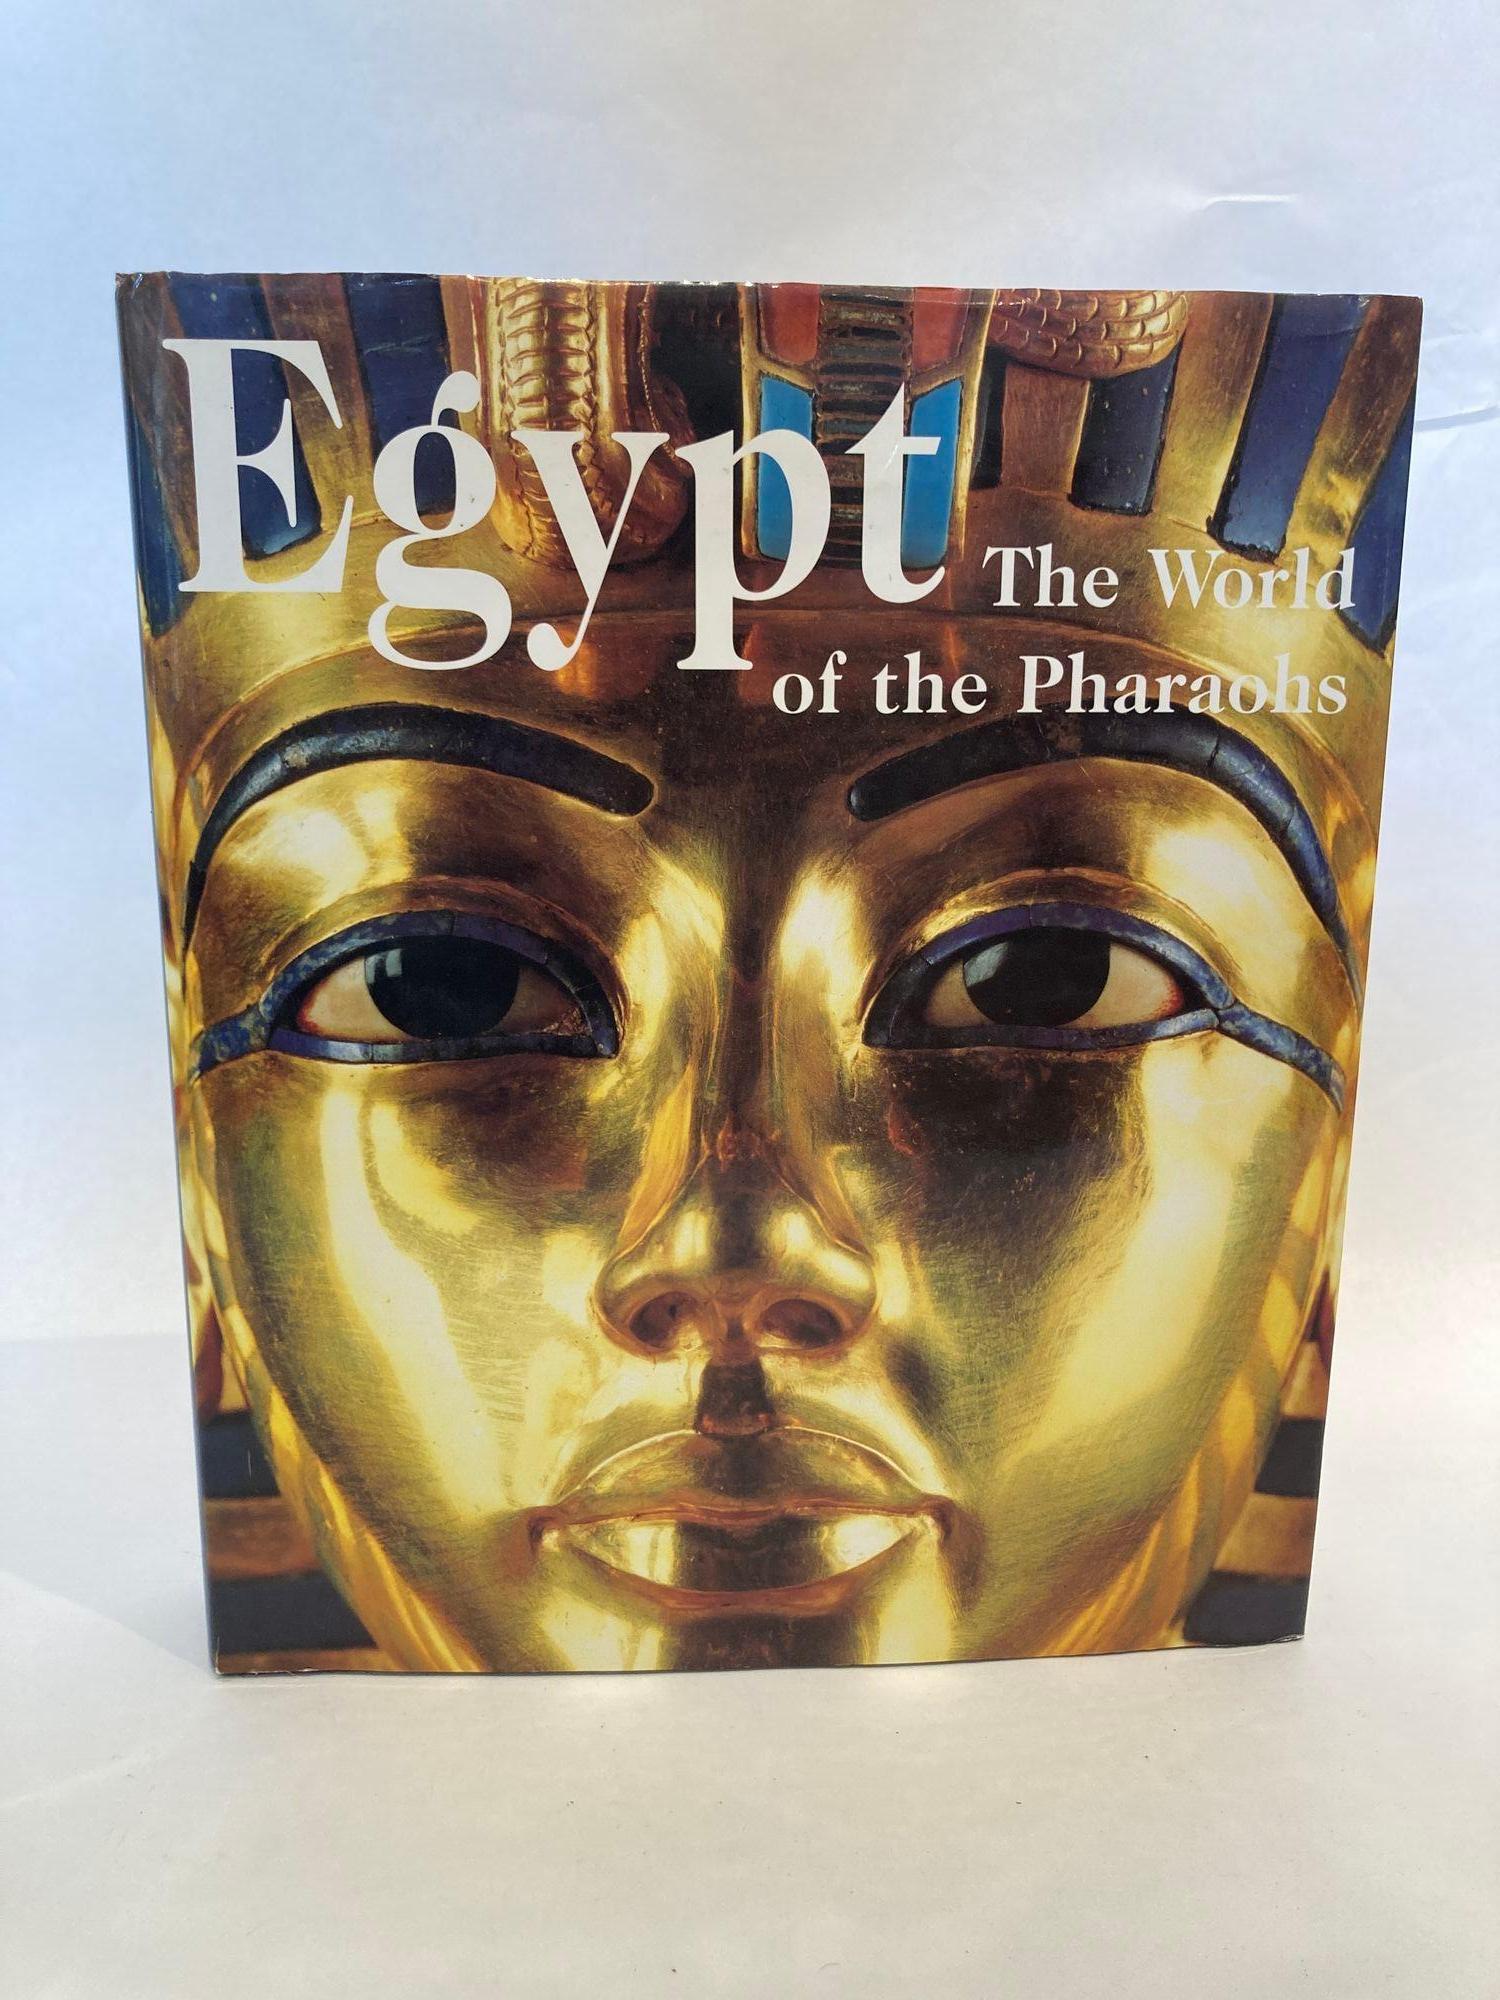 Egypt: The World of the Pharaohs Regine Schulz.
Collectible 1st edition, 1st printing 1998
Large hardcover coffee table book, comes with a free Egyptian bookmark.
Title: Egypt: The World of the Pharaohs
Publisher: H. F. Ullmann
Publication